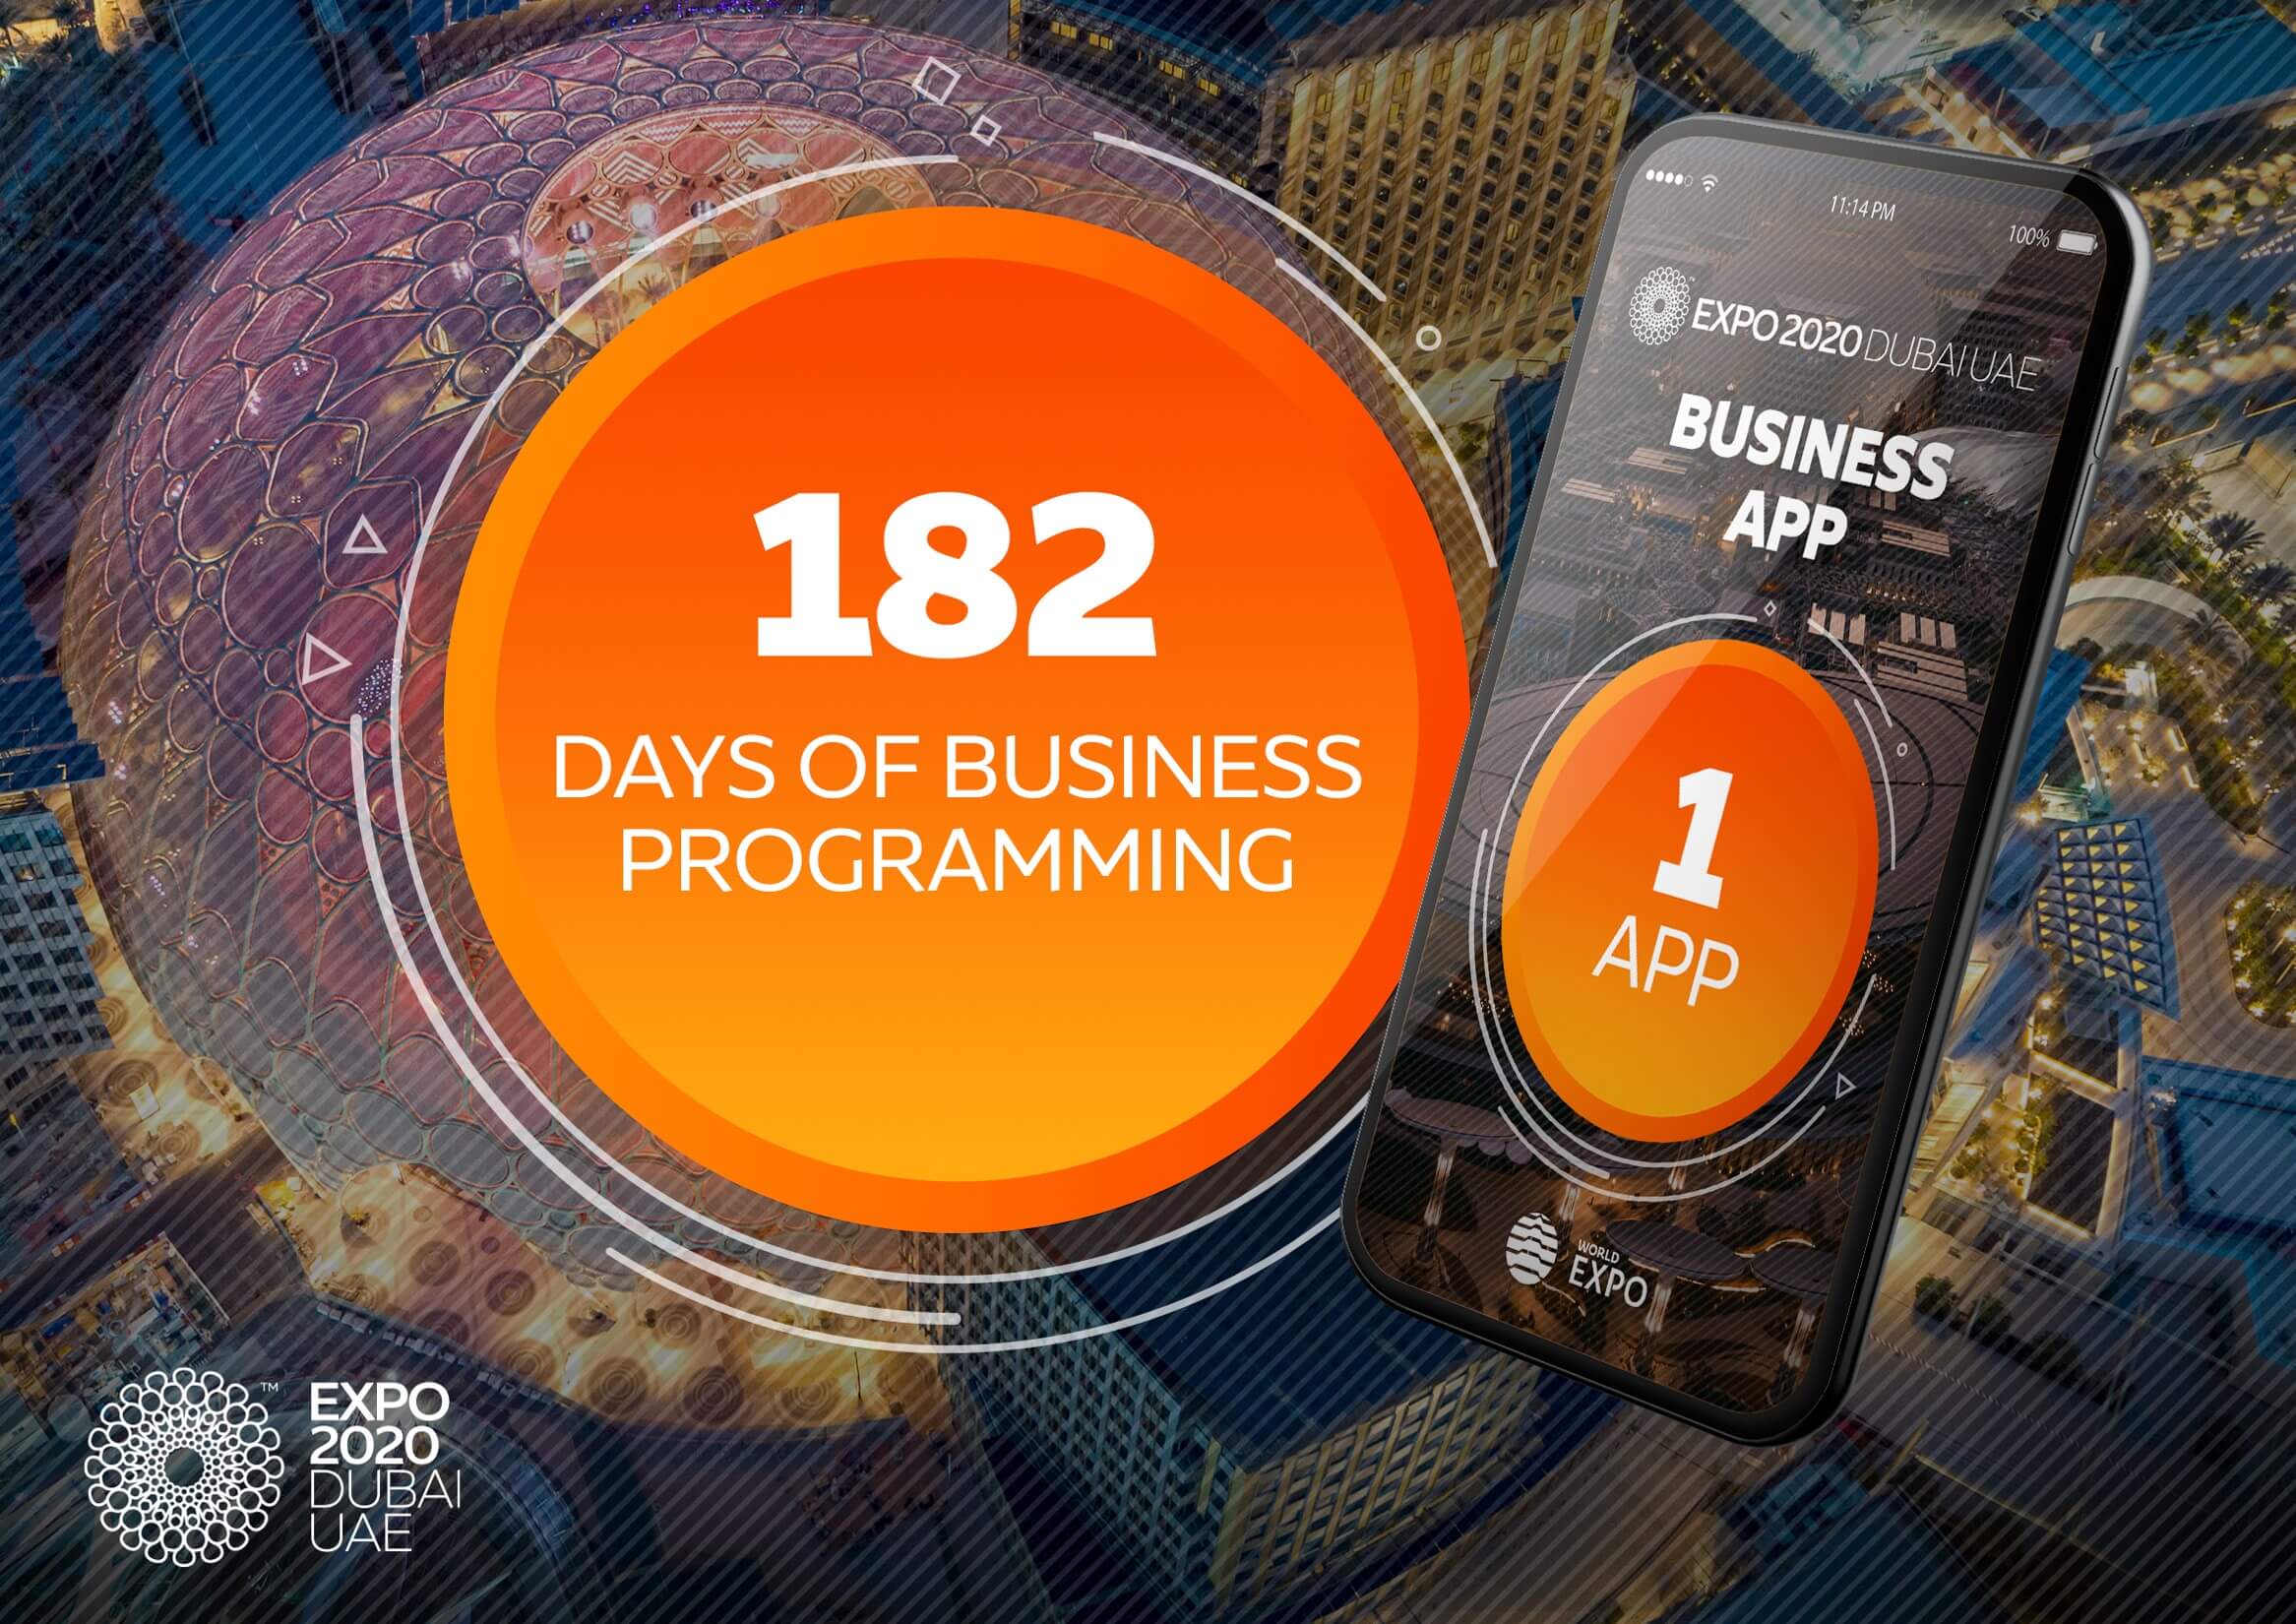 Expo 2020 Business App